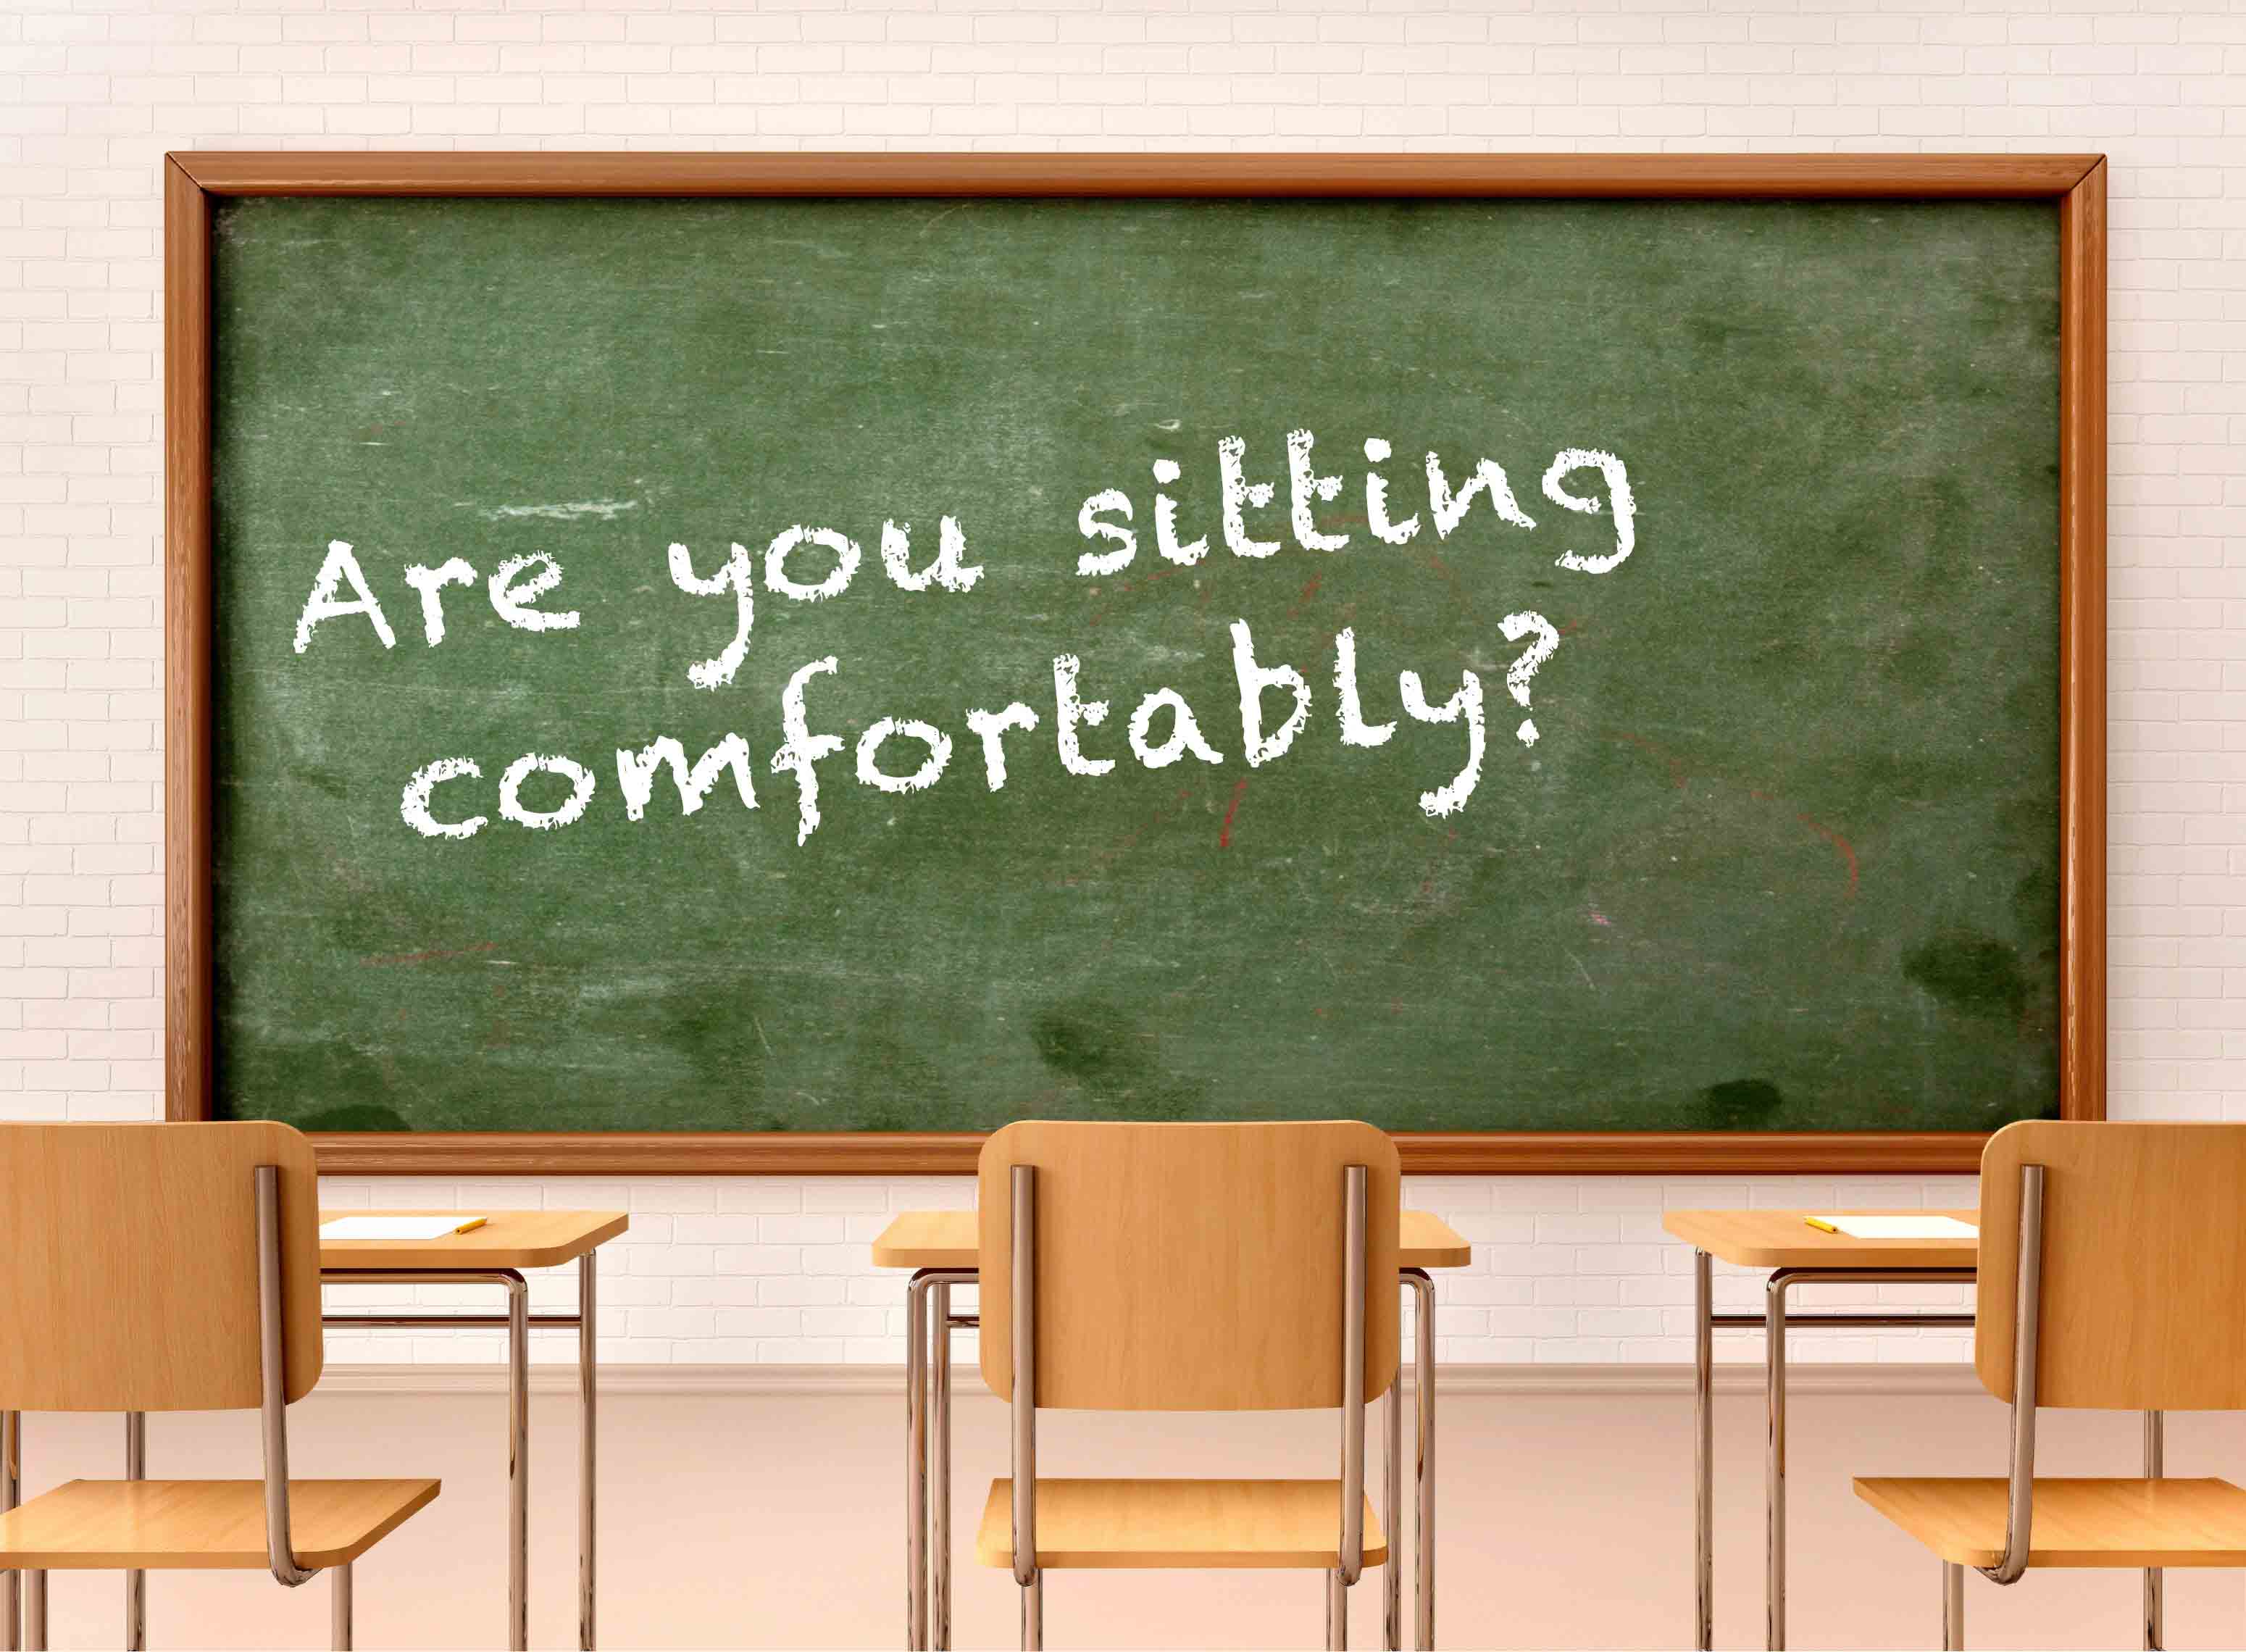 Education: Are you sitting comfortably?